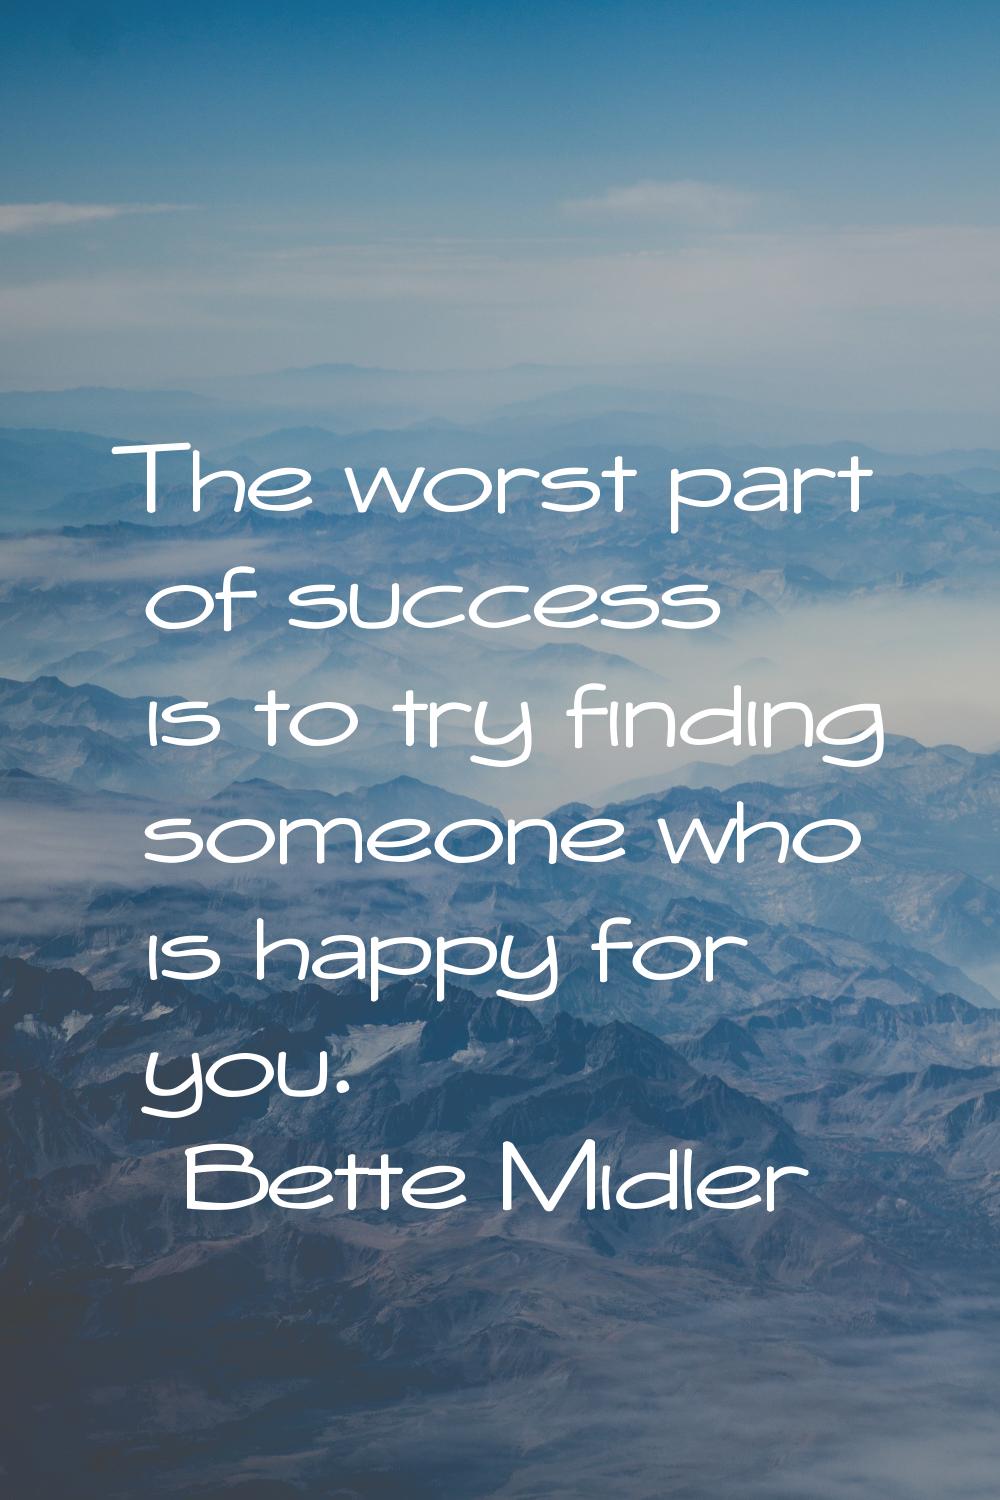 The worst part of success is to try finding someone who is happy for you.